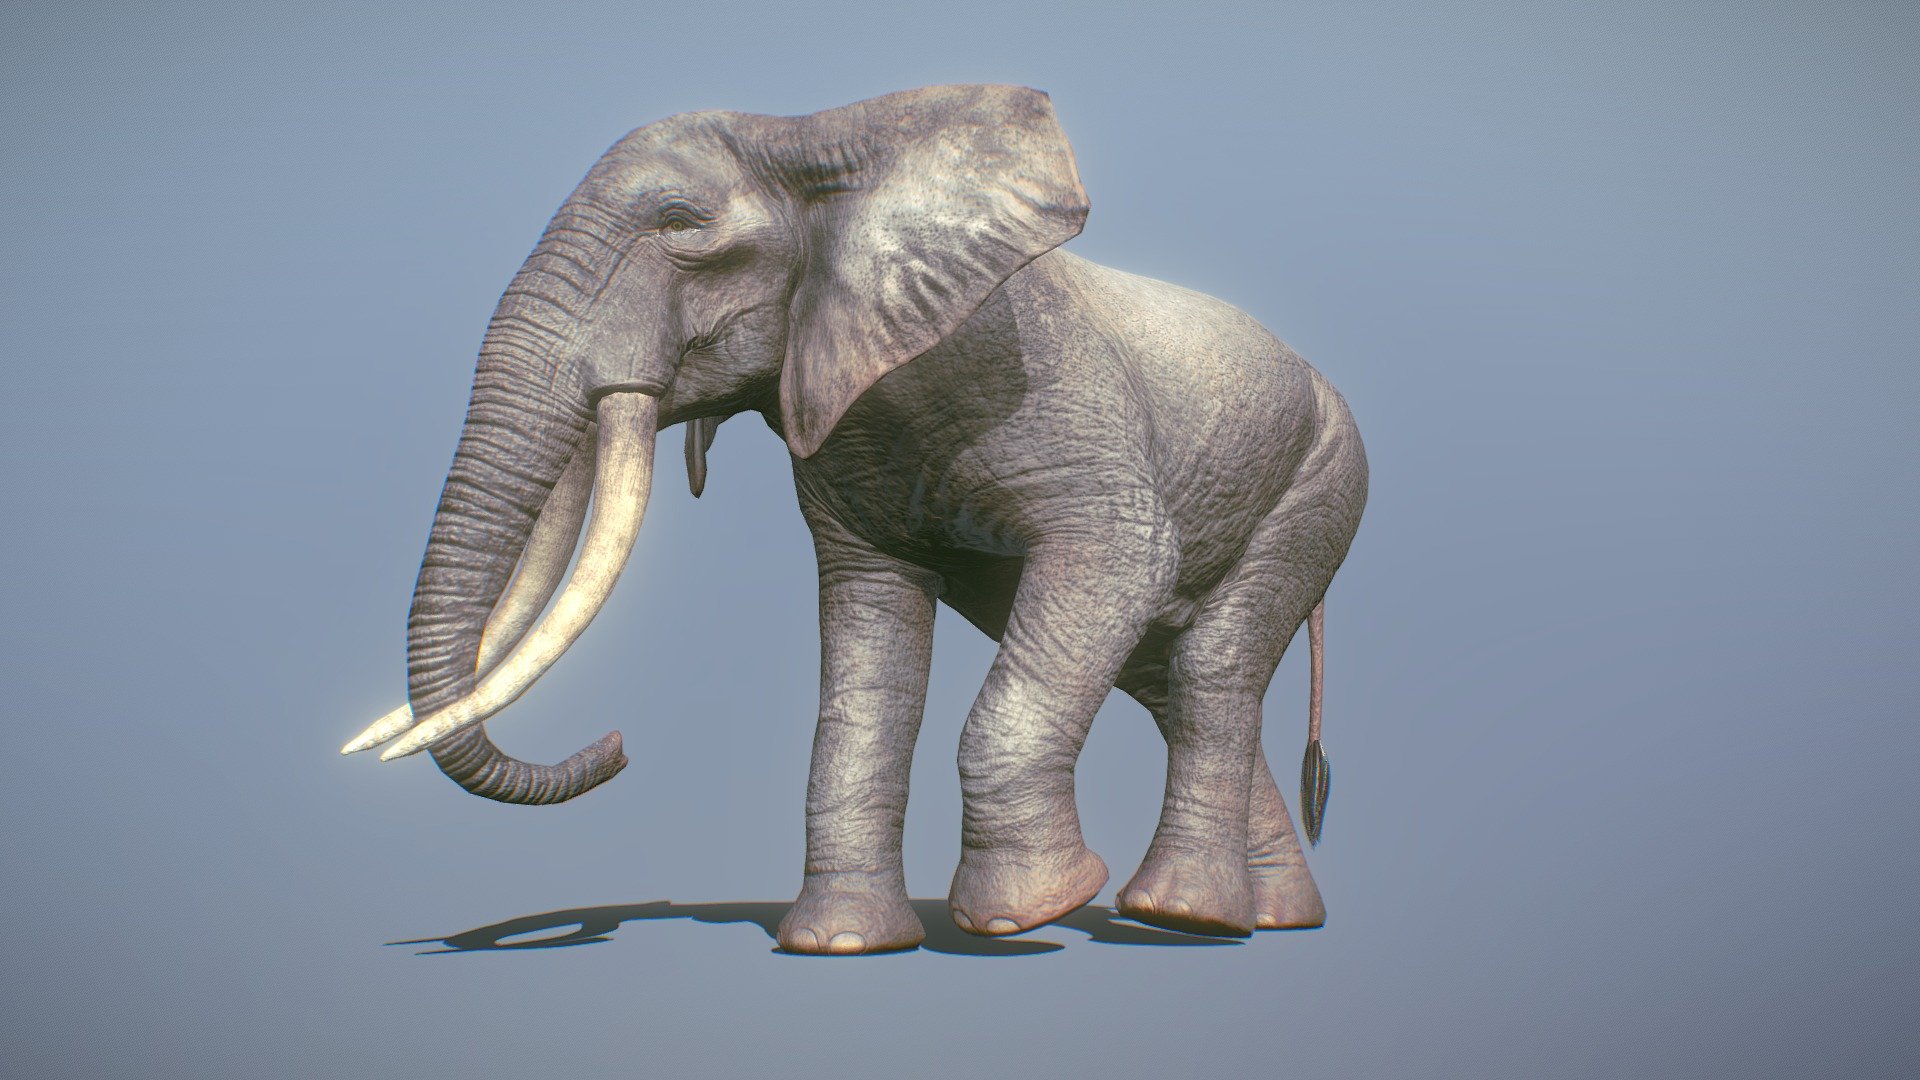 Quick example of using Blend Shapes and Scaling bones to change the same mesh from baby to adult - Elephant Baby To Adult - 3D model by Malbers Animations (@malbers.shark87) 3d model